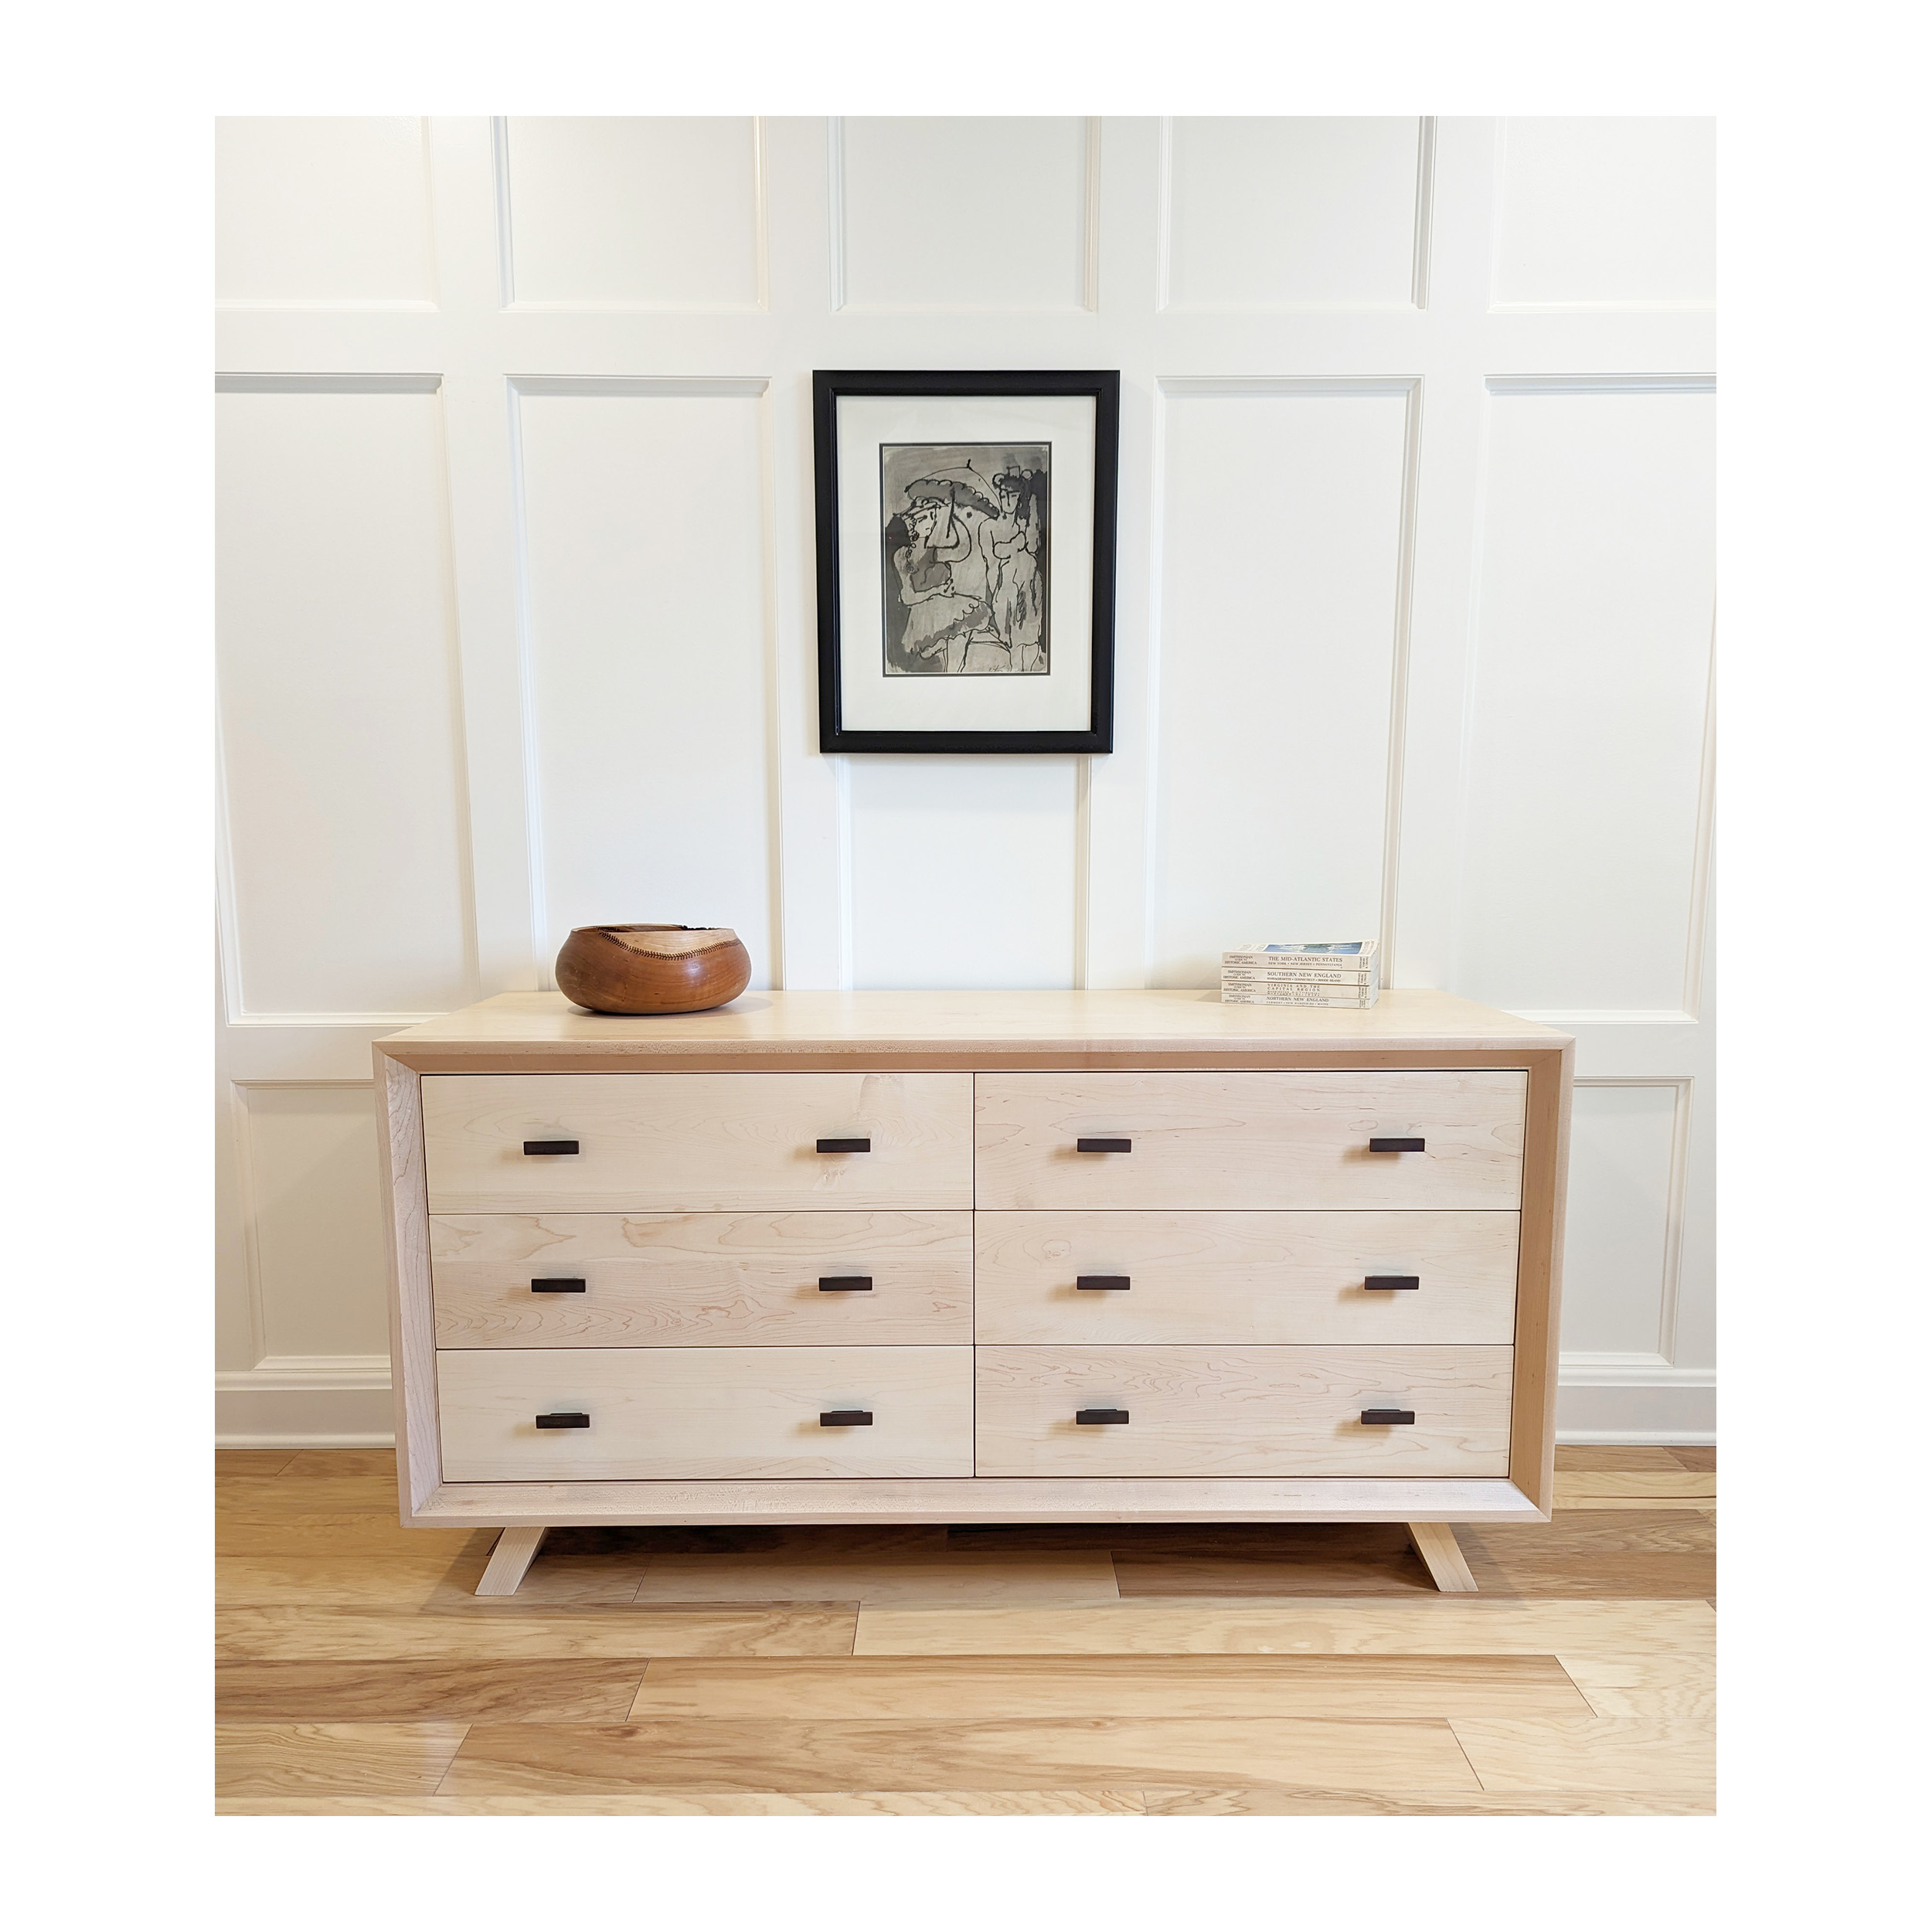 Series 555 Dresser With Six Drawers At 60″ In Width